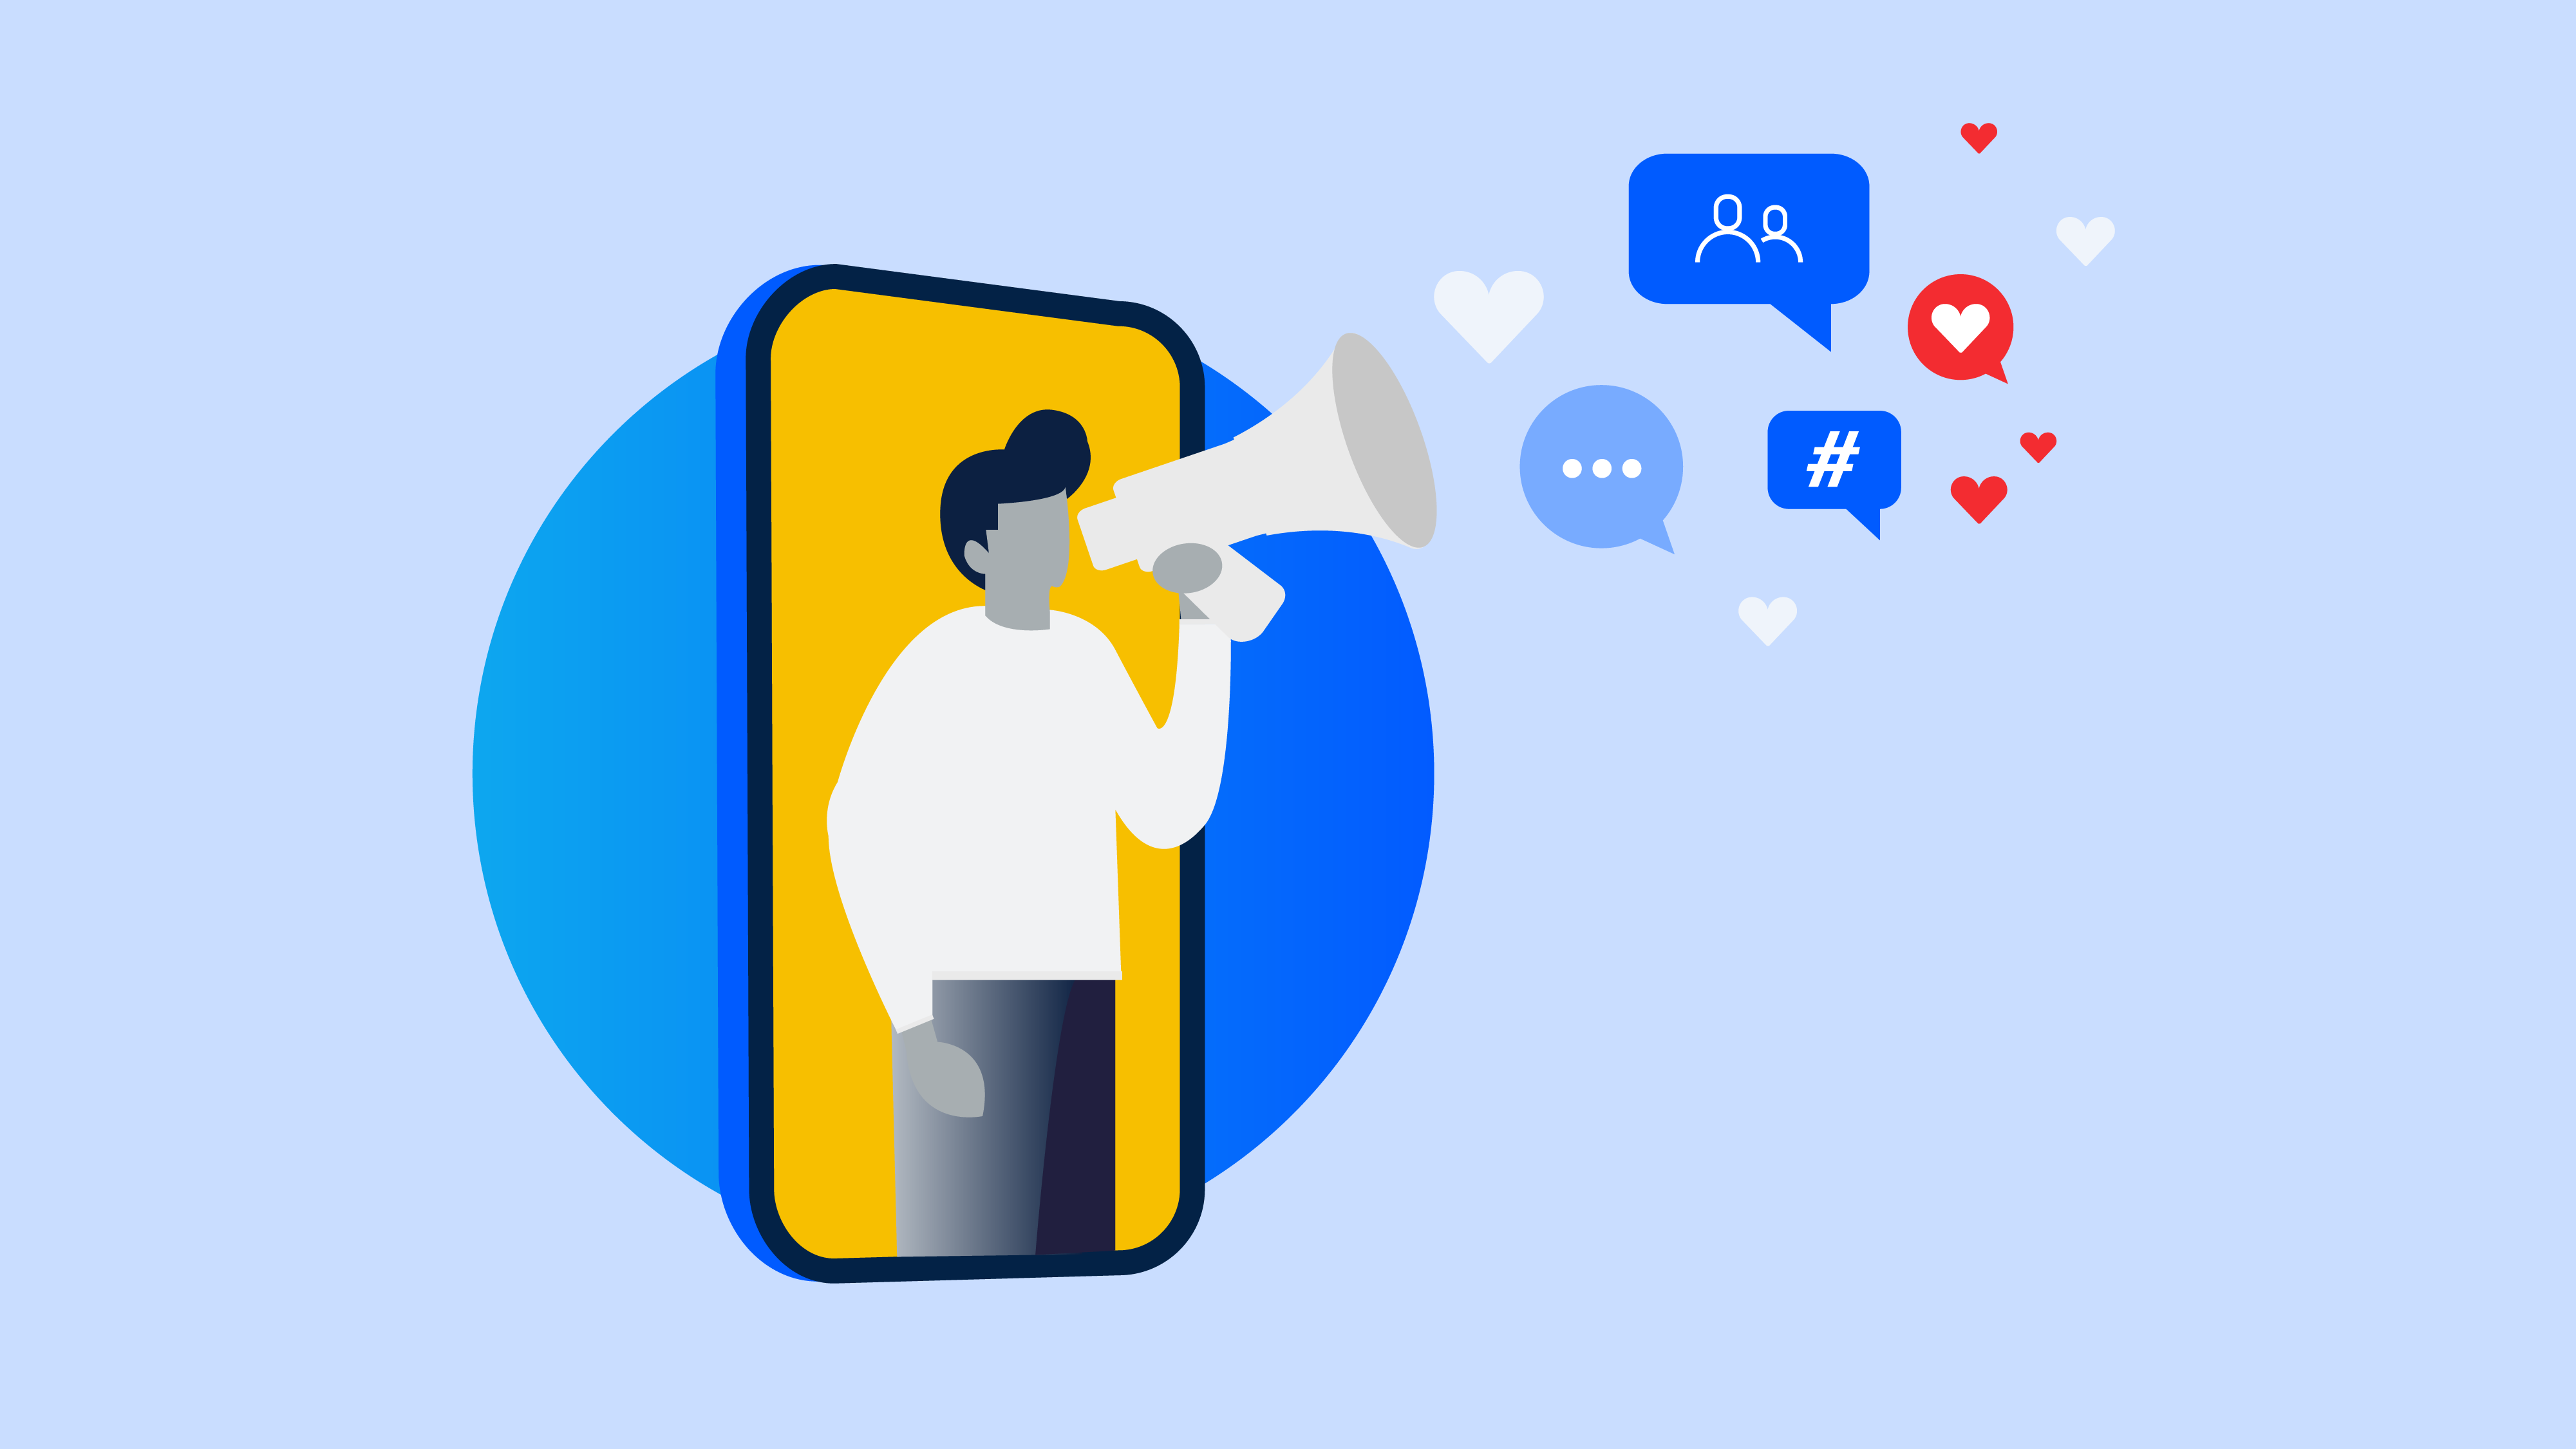 Illustration of a megaphone with social media icons.